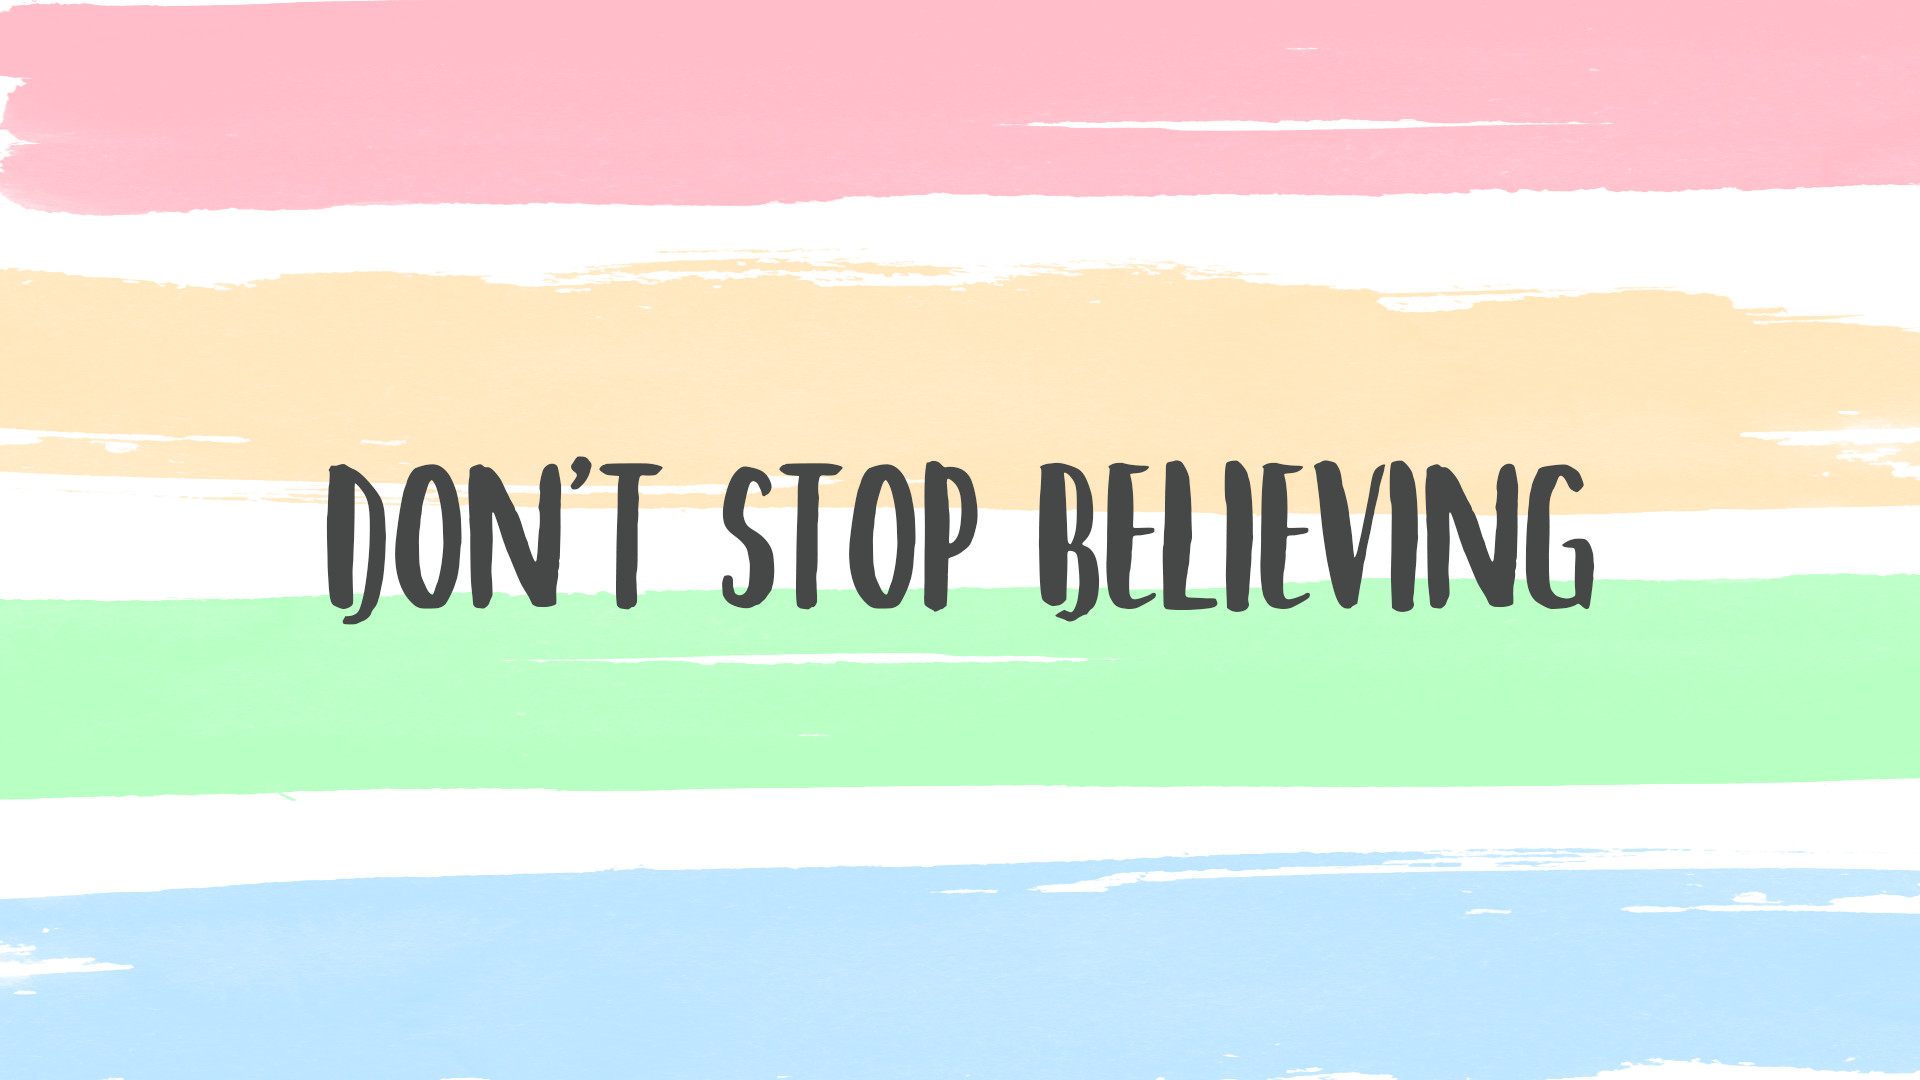 1920x1080 Don't stop believing | motivational quote for desktop background wallpaper.  find more to download free - girl power inspiration on the blog.